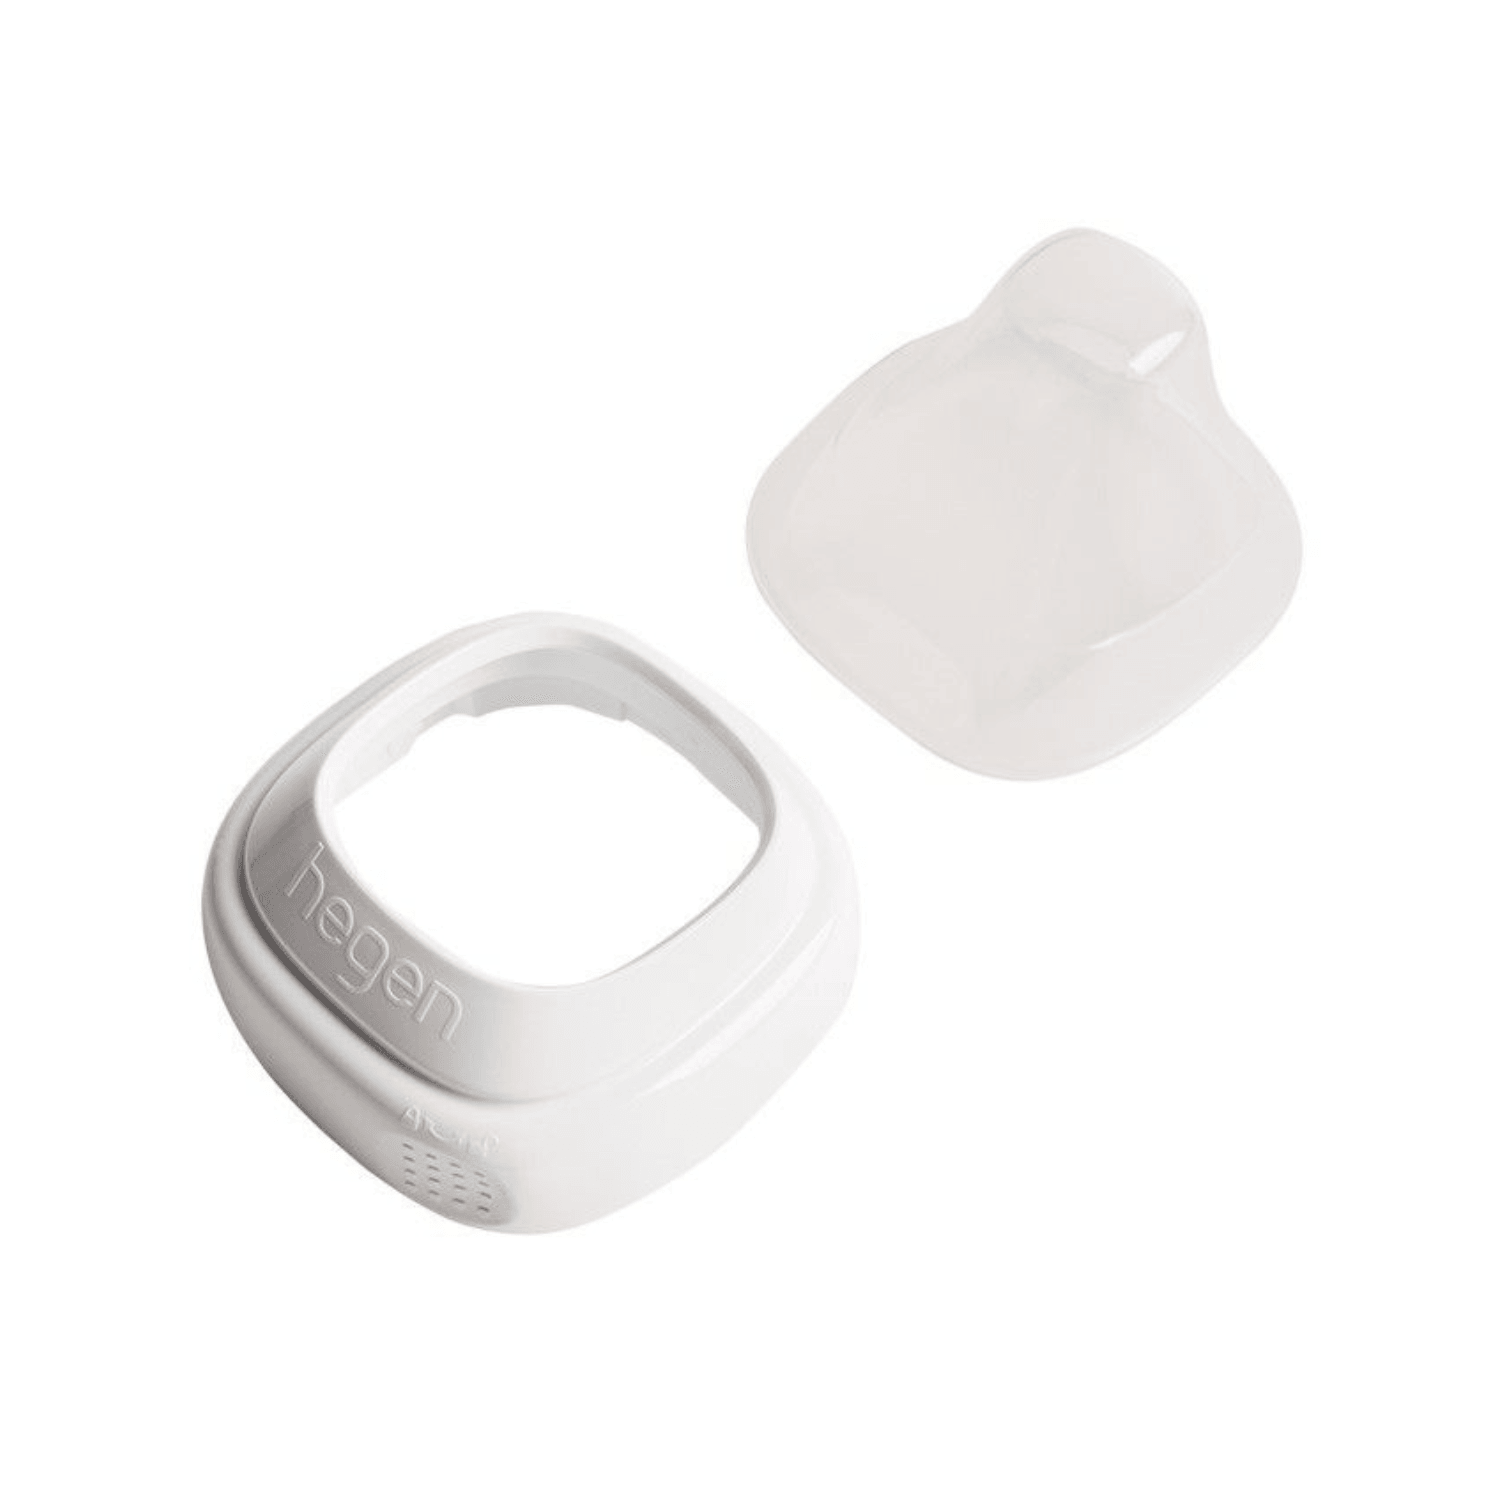 Hegen PCTO™ Collar And Transparent Cover White - hegen.us